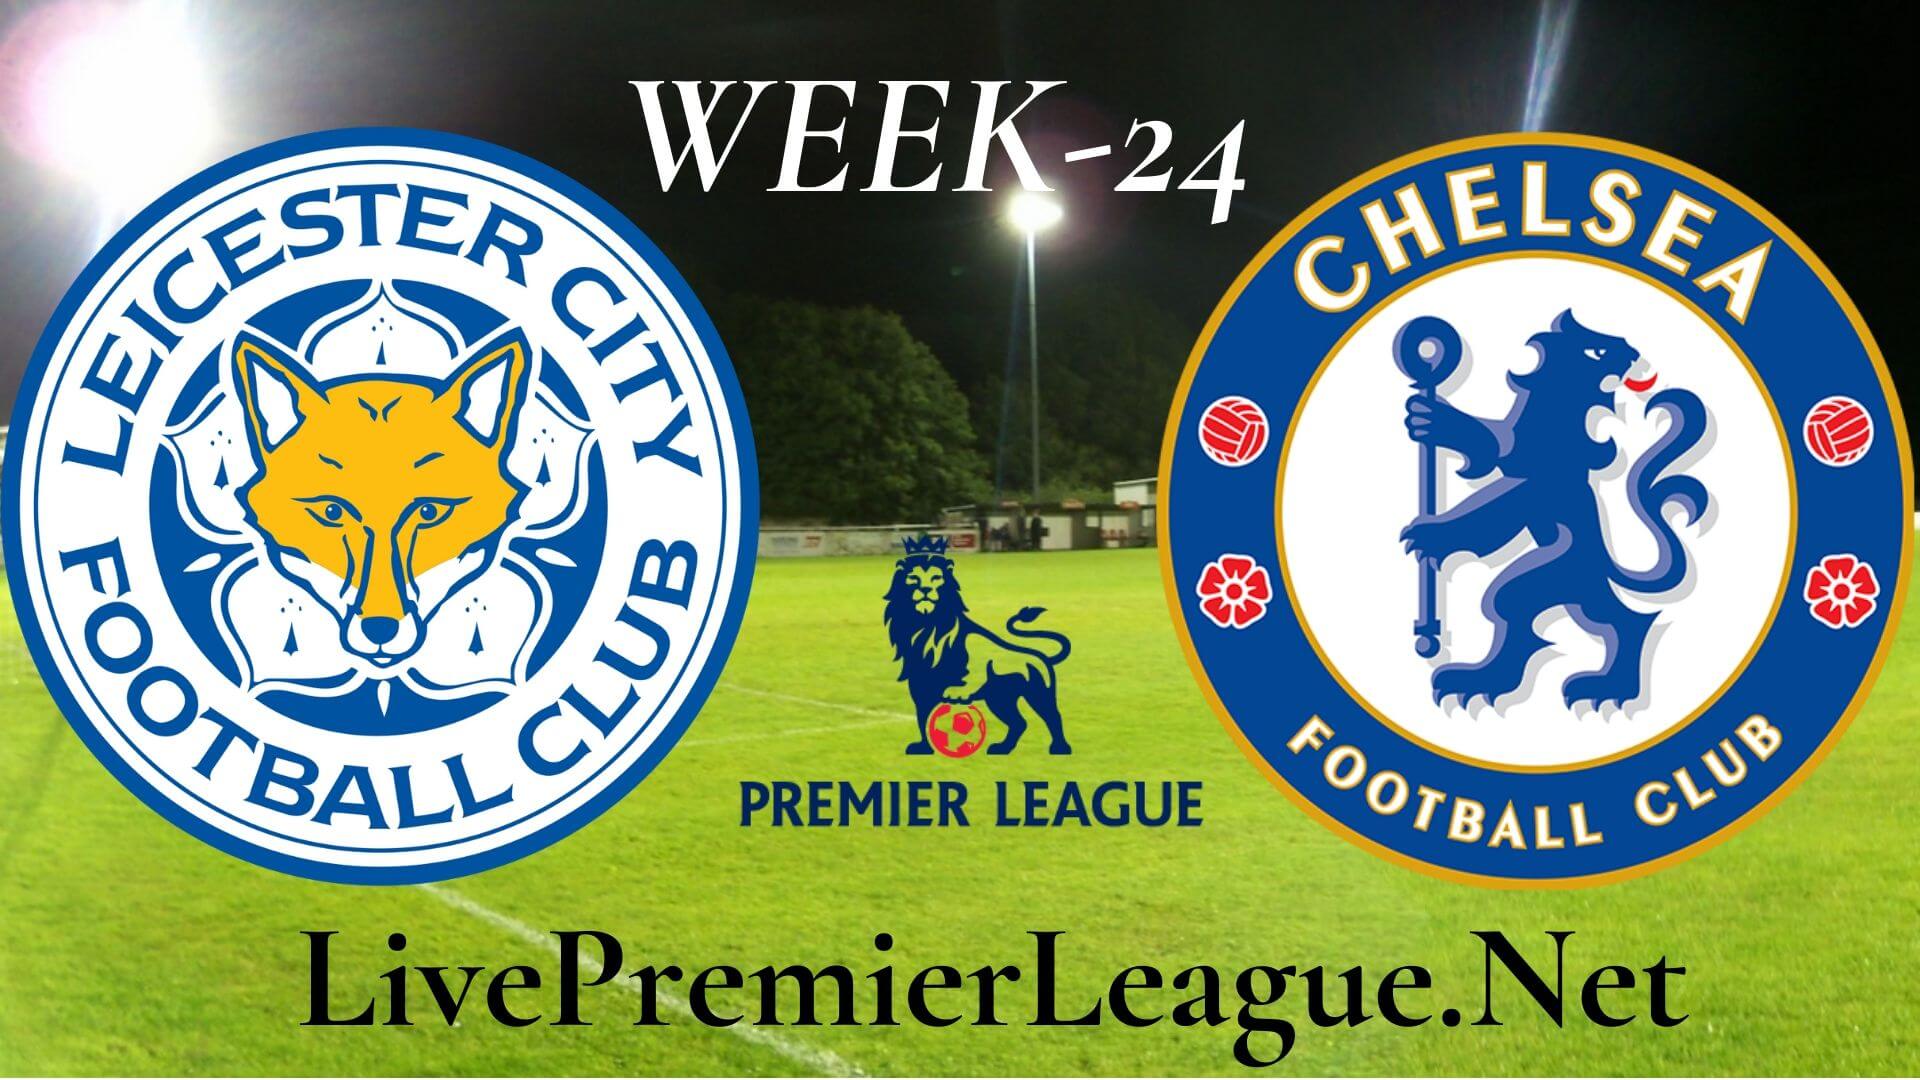 Leicester City vs Chelsea live stream | EPL Week 24